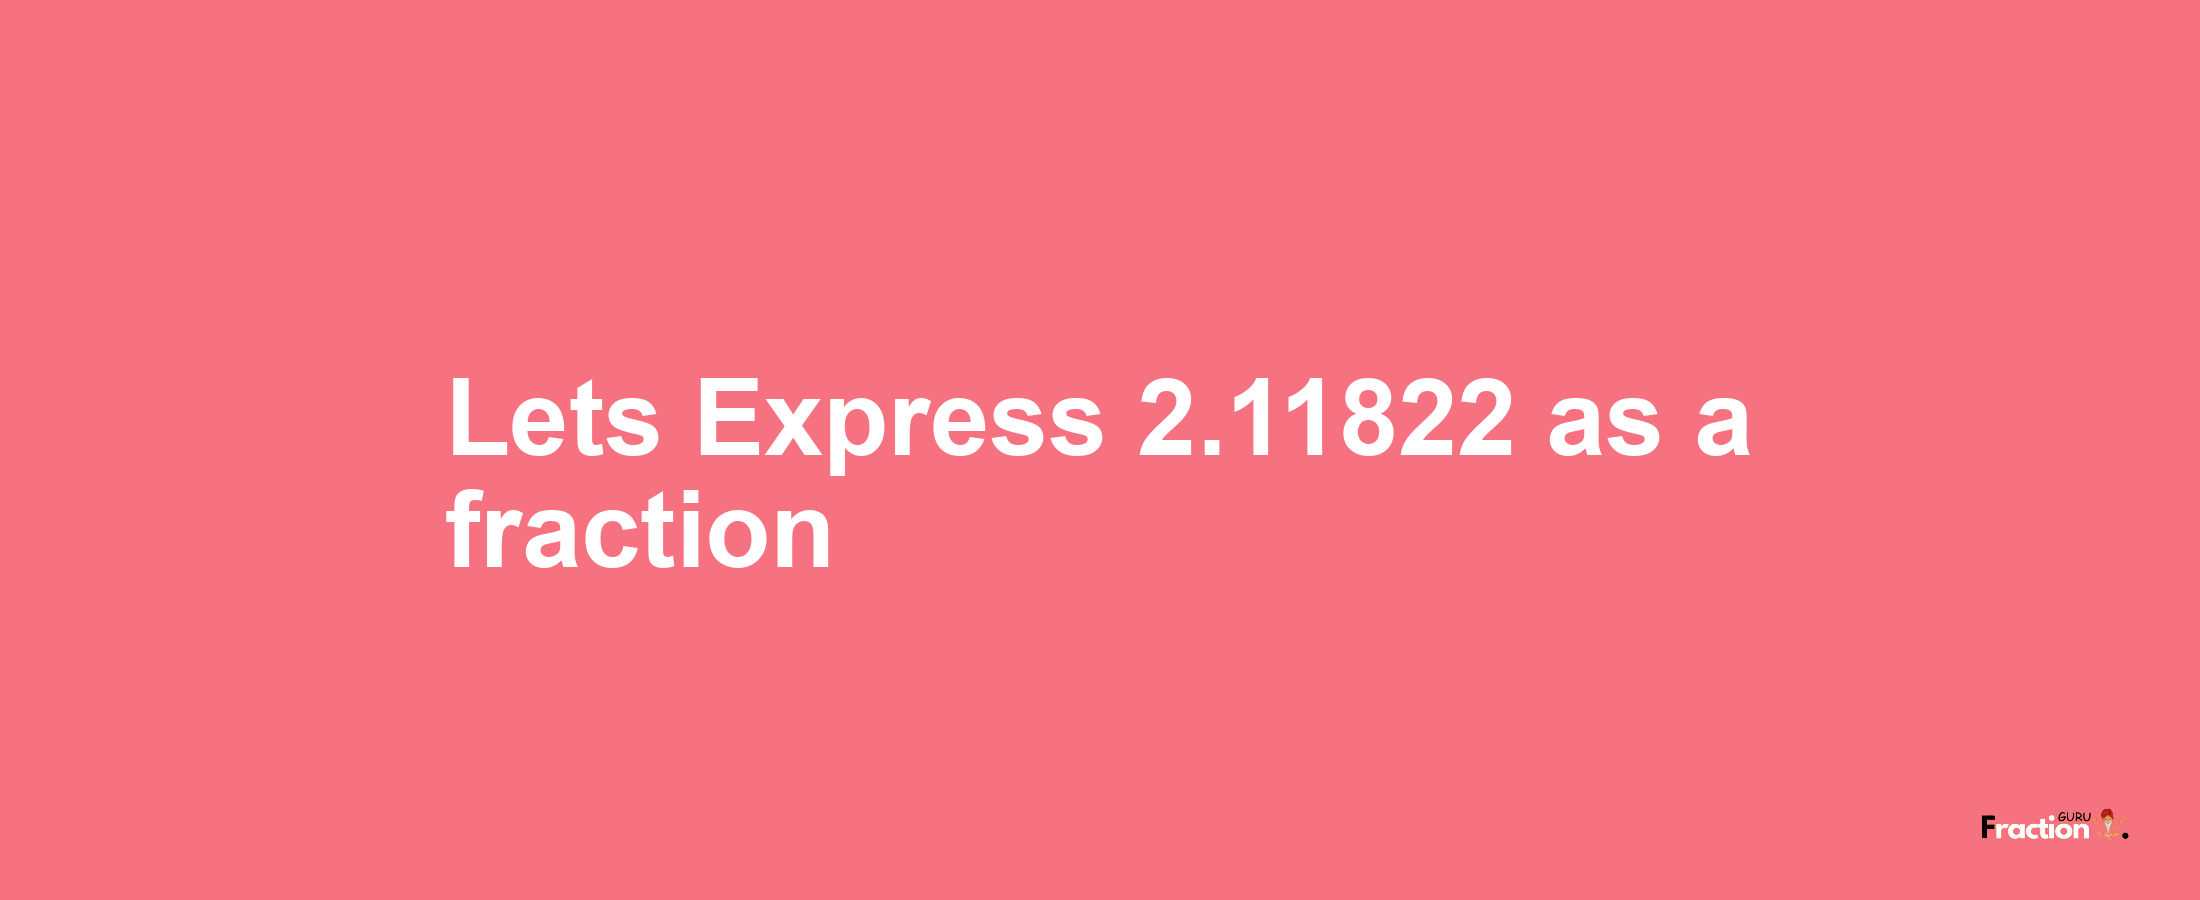 Lets Express 2.11822 as afraction